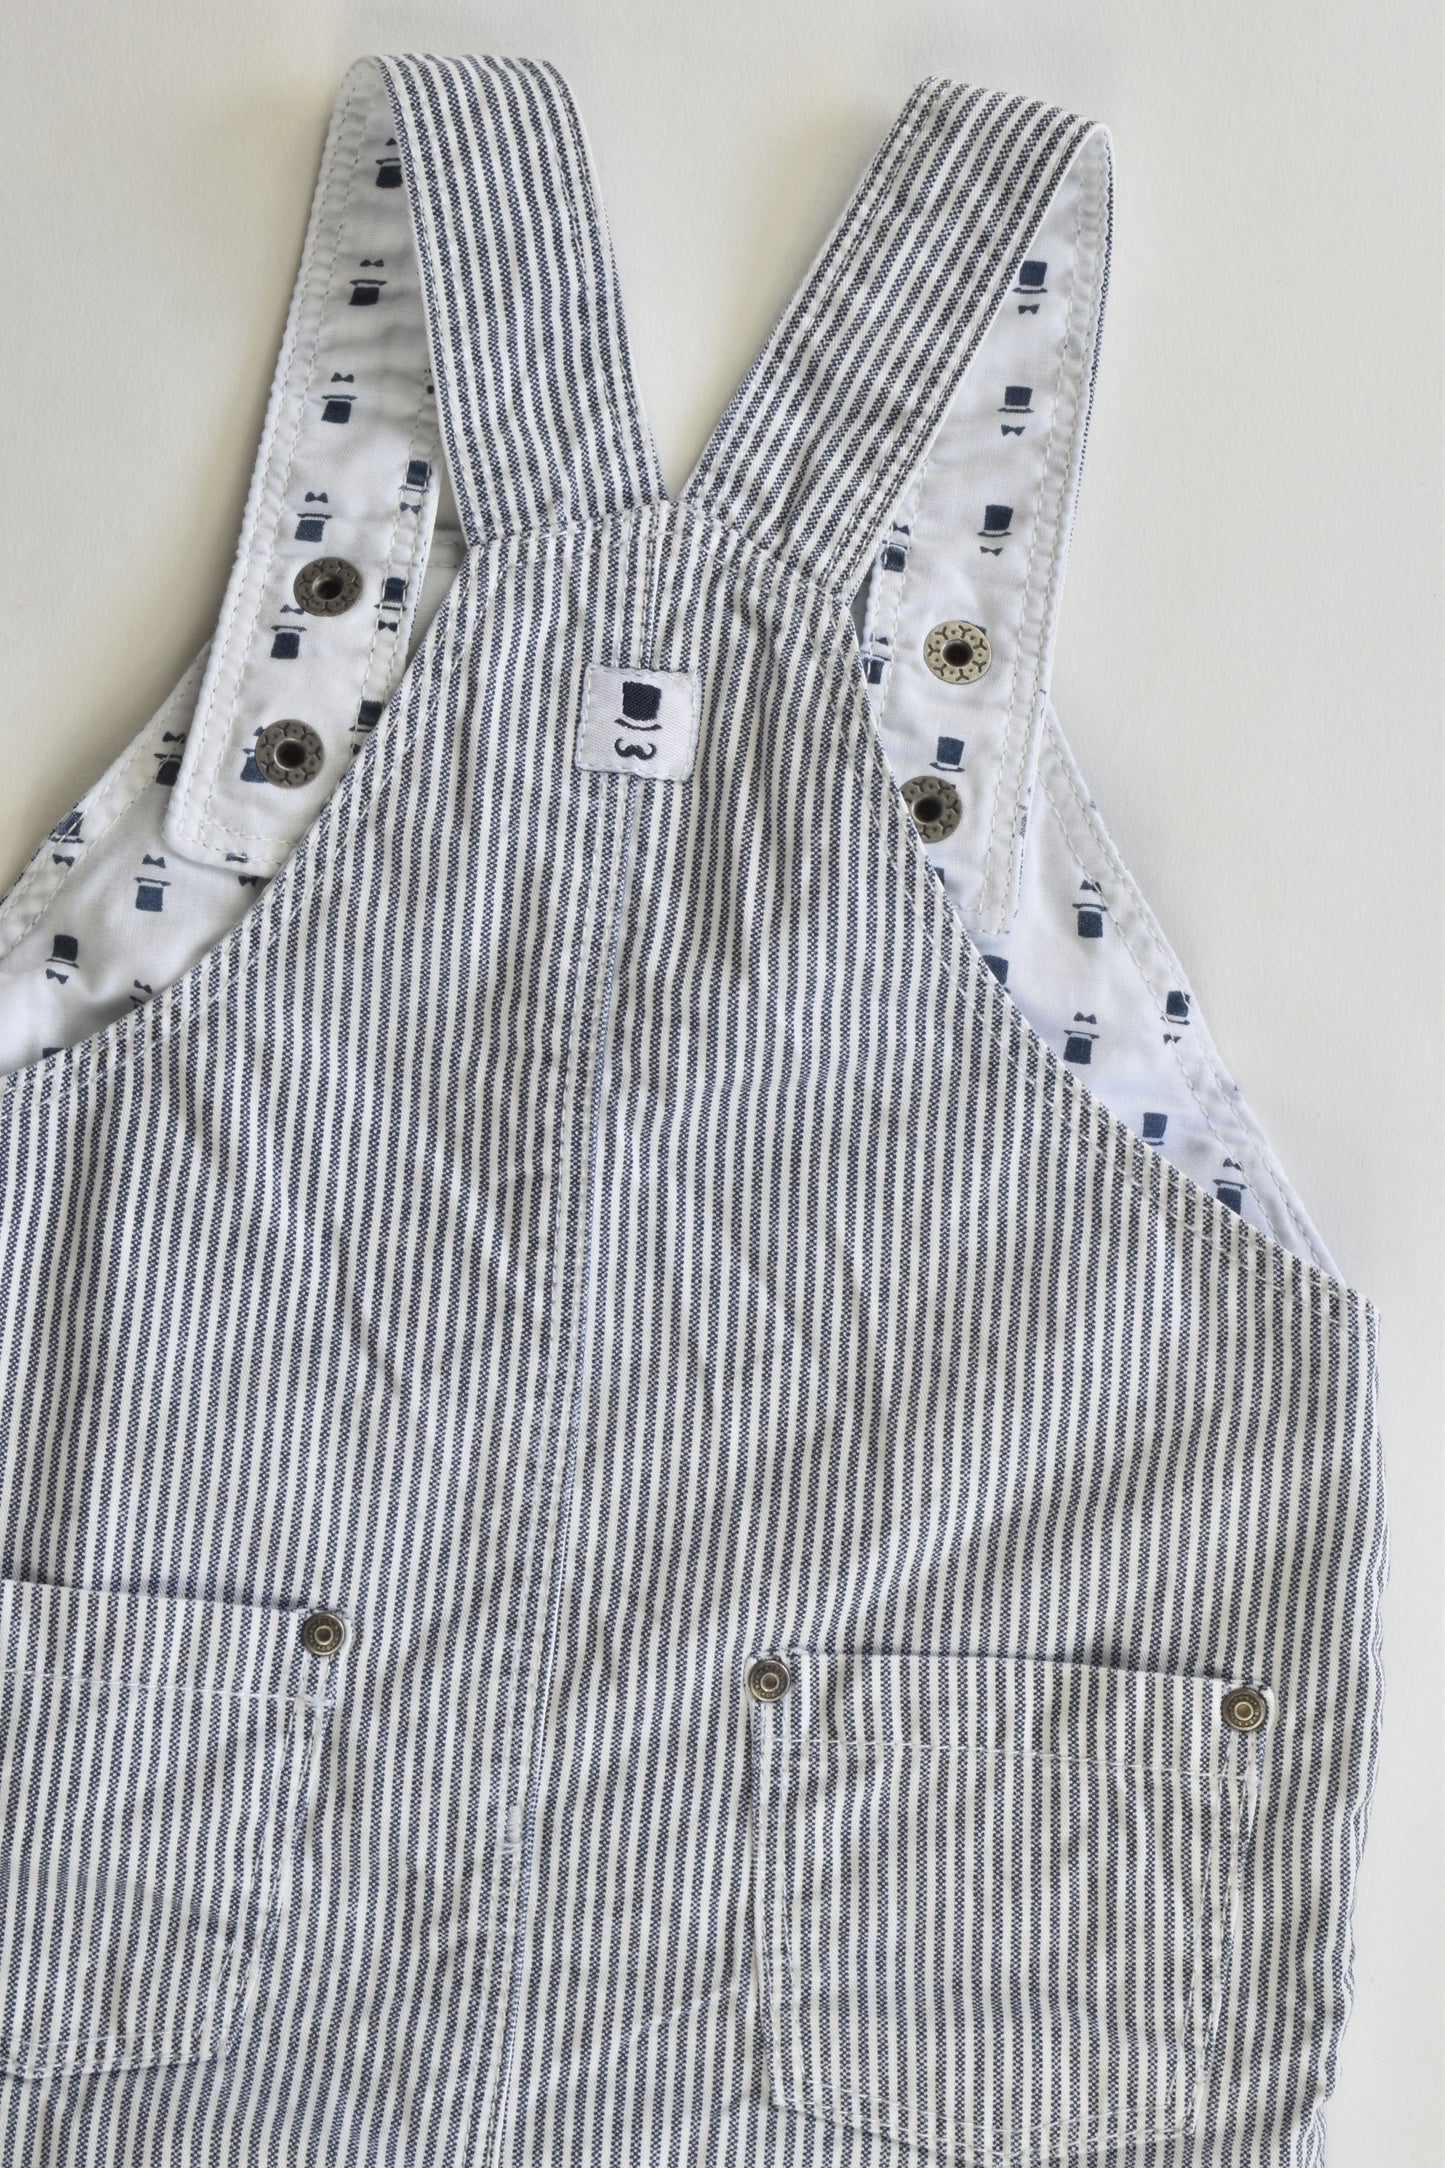 Target Size 00 (3-6 months) Striped Overalls